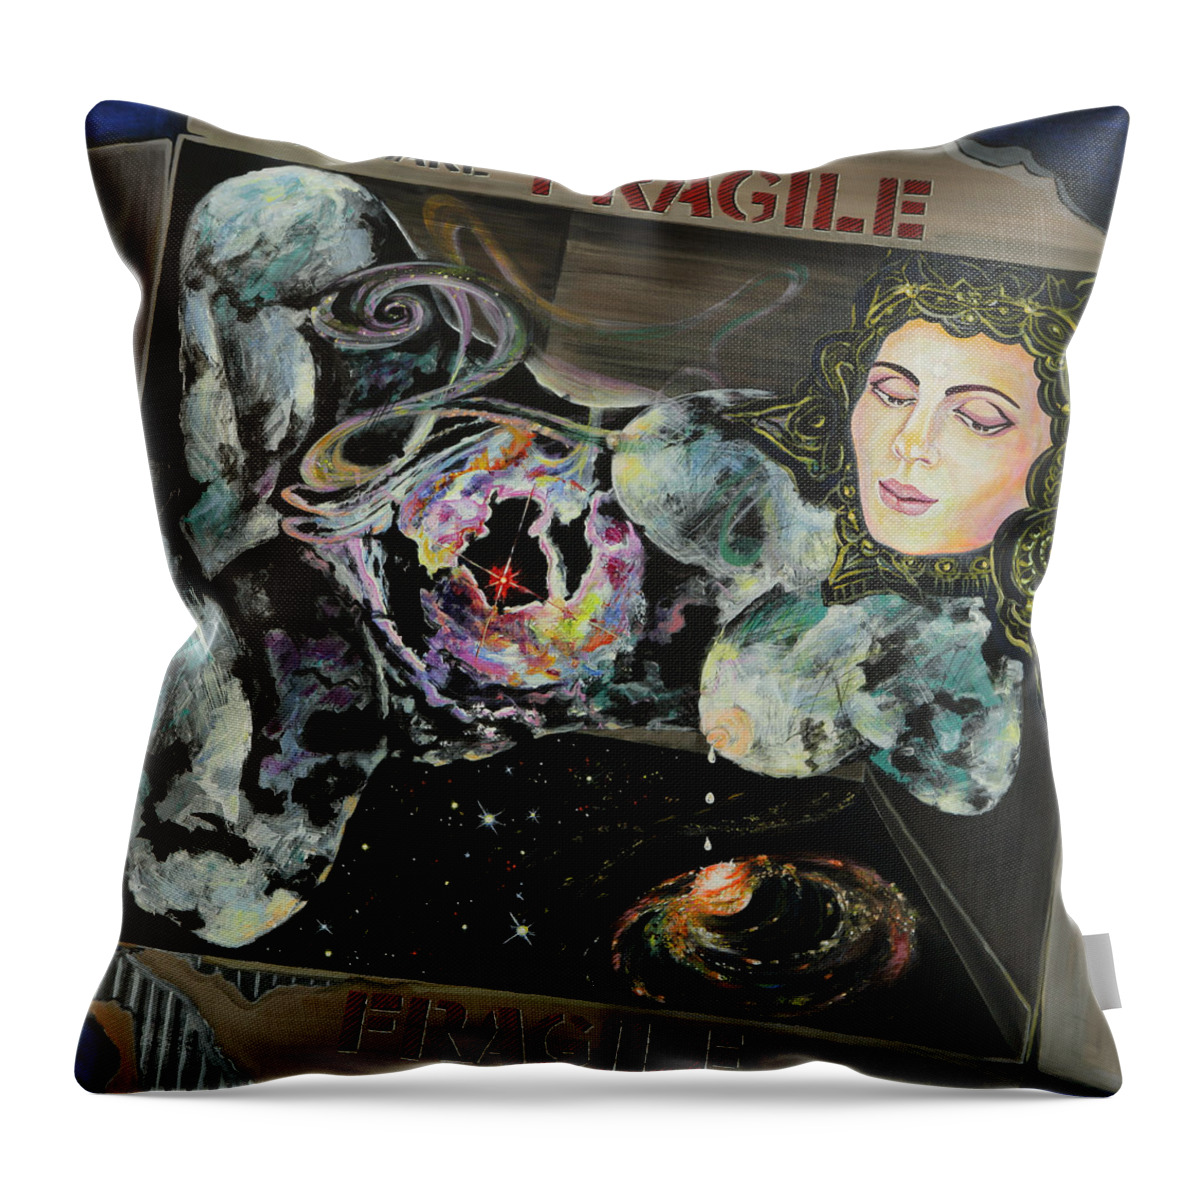 Love Throw Pillow featuring the painting Fragile by Yelena Tylkina